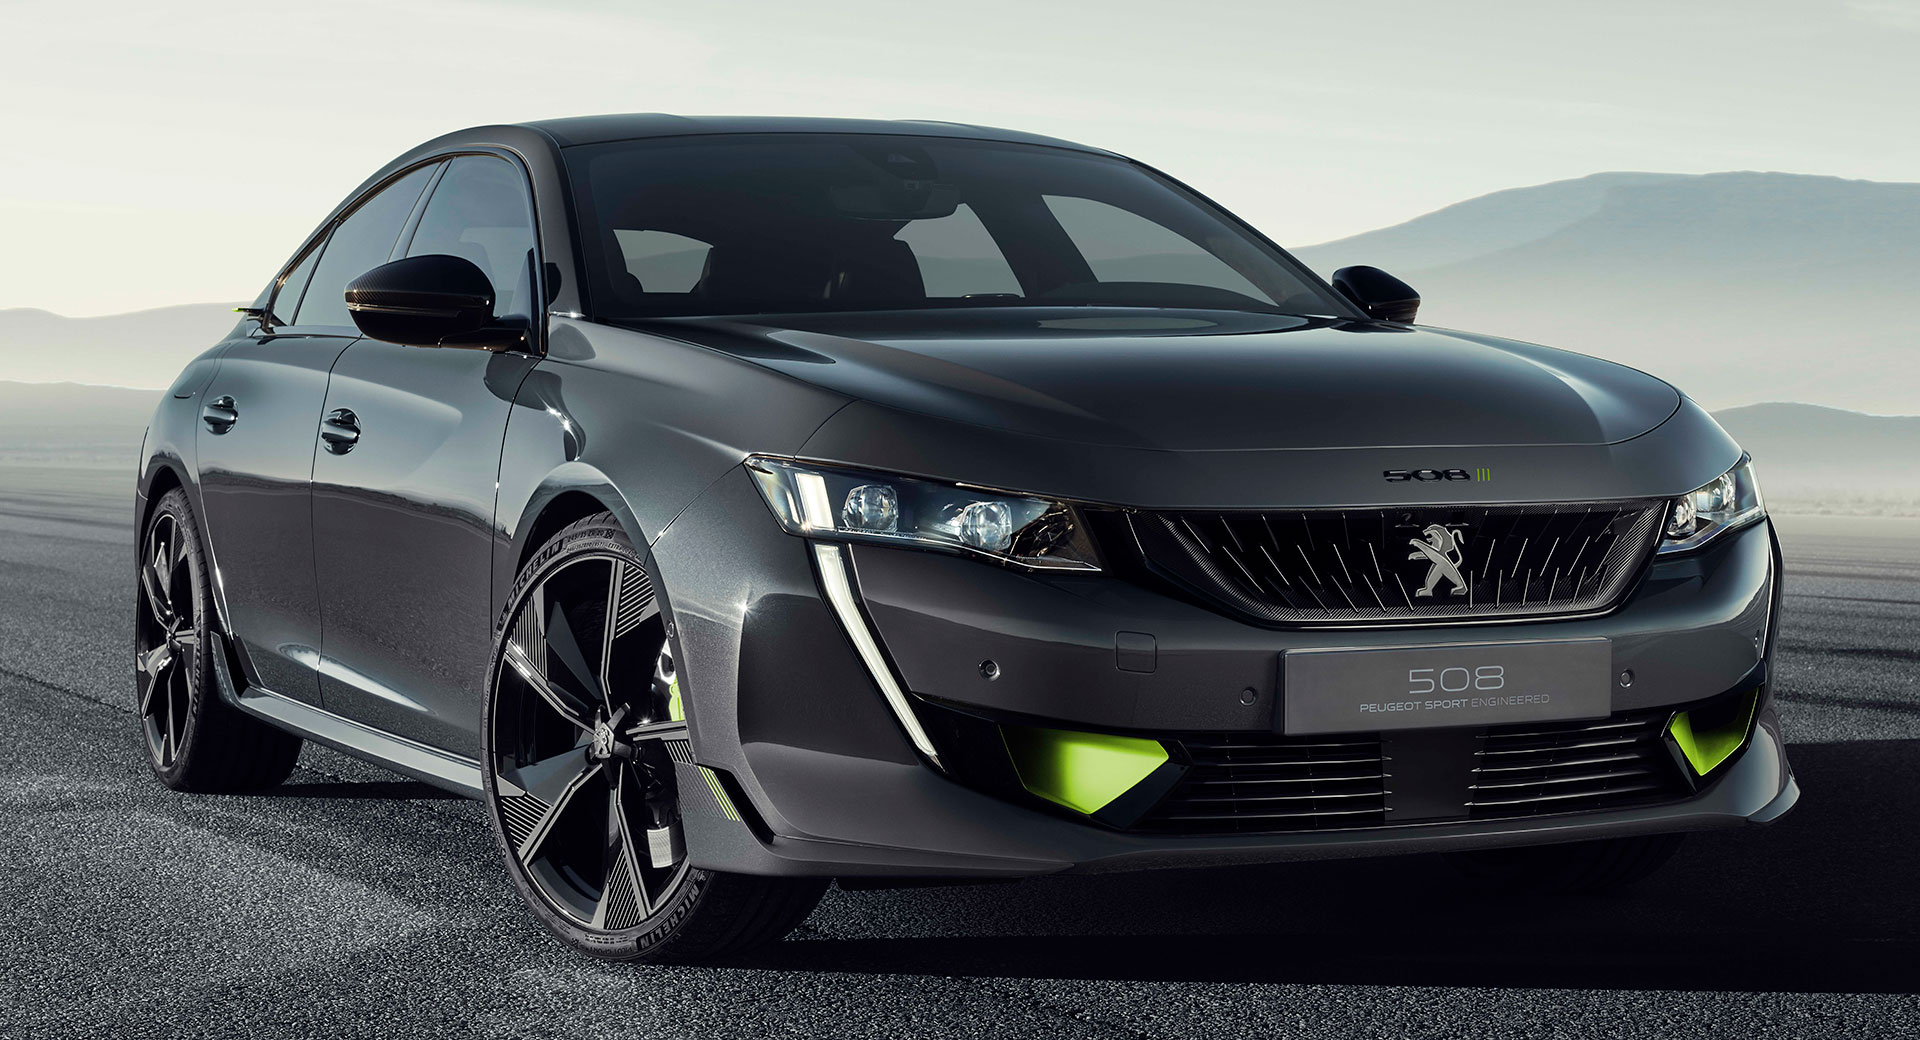 Oh no! We might not see any more Peugeot Sport Engineered road